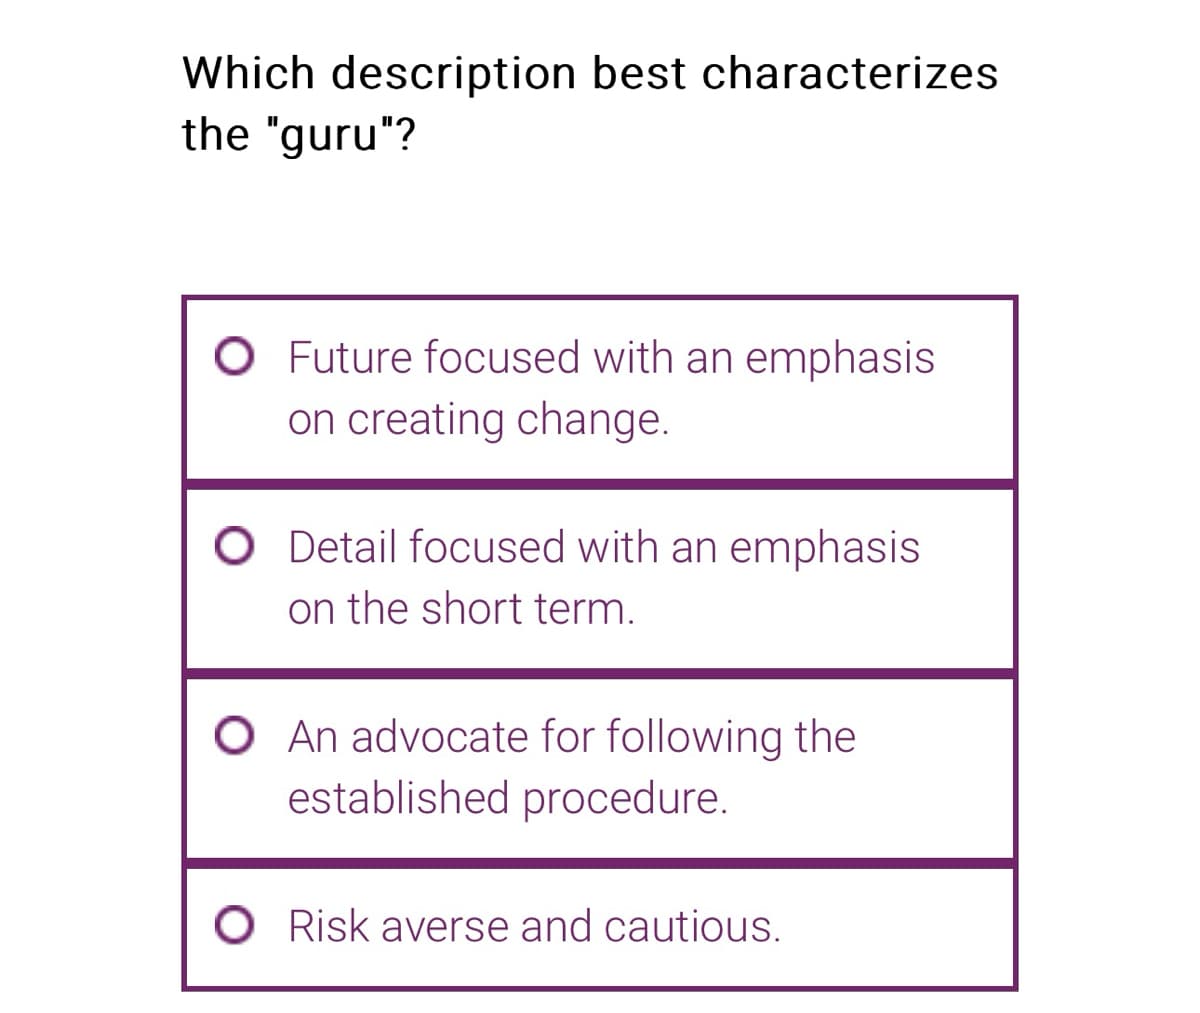 Which description best characterizes
the "guru"?
O Future focused with an emphasis
on creating change.
O Detail focused with an emphasis
on the short term.
O An advocate for following the
established procedure.
O Risk averse and cautious.